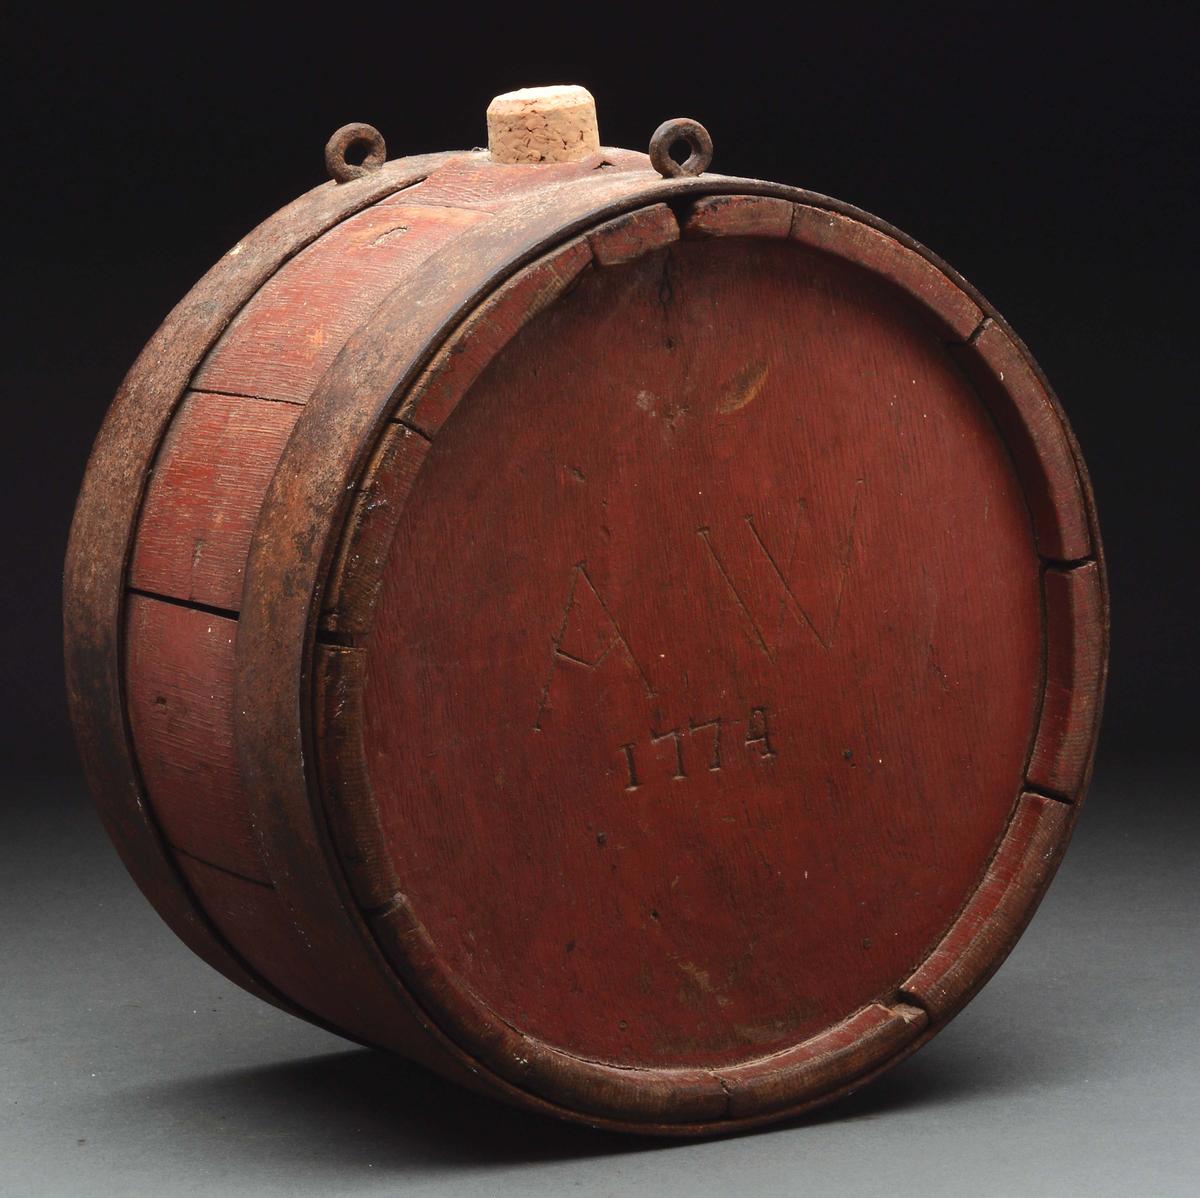 Important and Historic Documented Revolutionary War Banded Field Canteen, Dated 1774 Carried at Batt